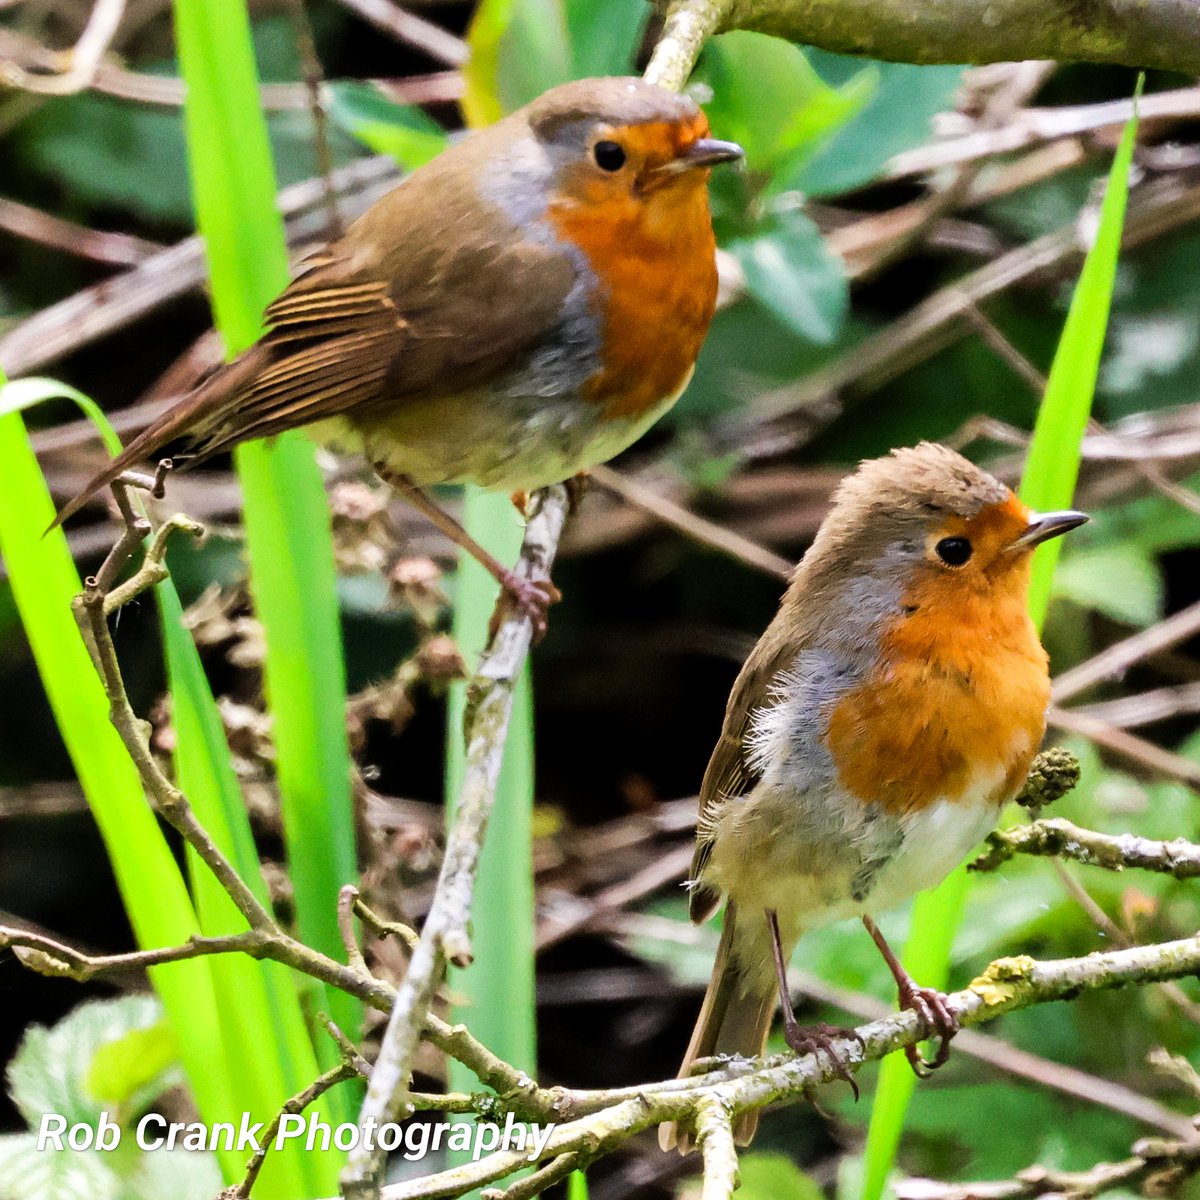 These Robins knew #TwosDay was approaching when they stopped for a photo at the weekend.
#canonphotography #birdphotography #TwitterNaturePhotography #naturelovers #TwitterNatureCommunity #NaturePhotograhpy